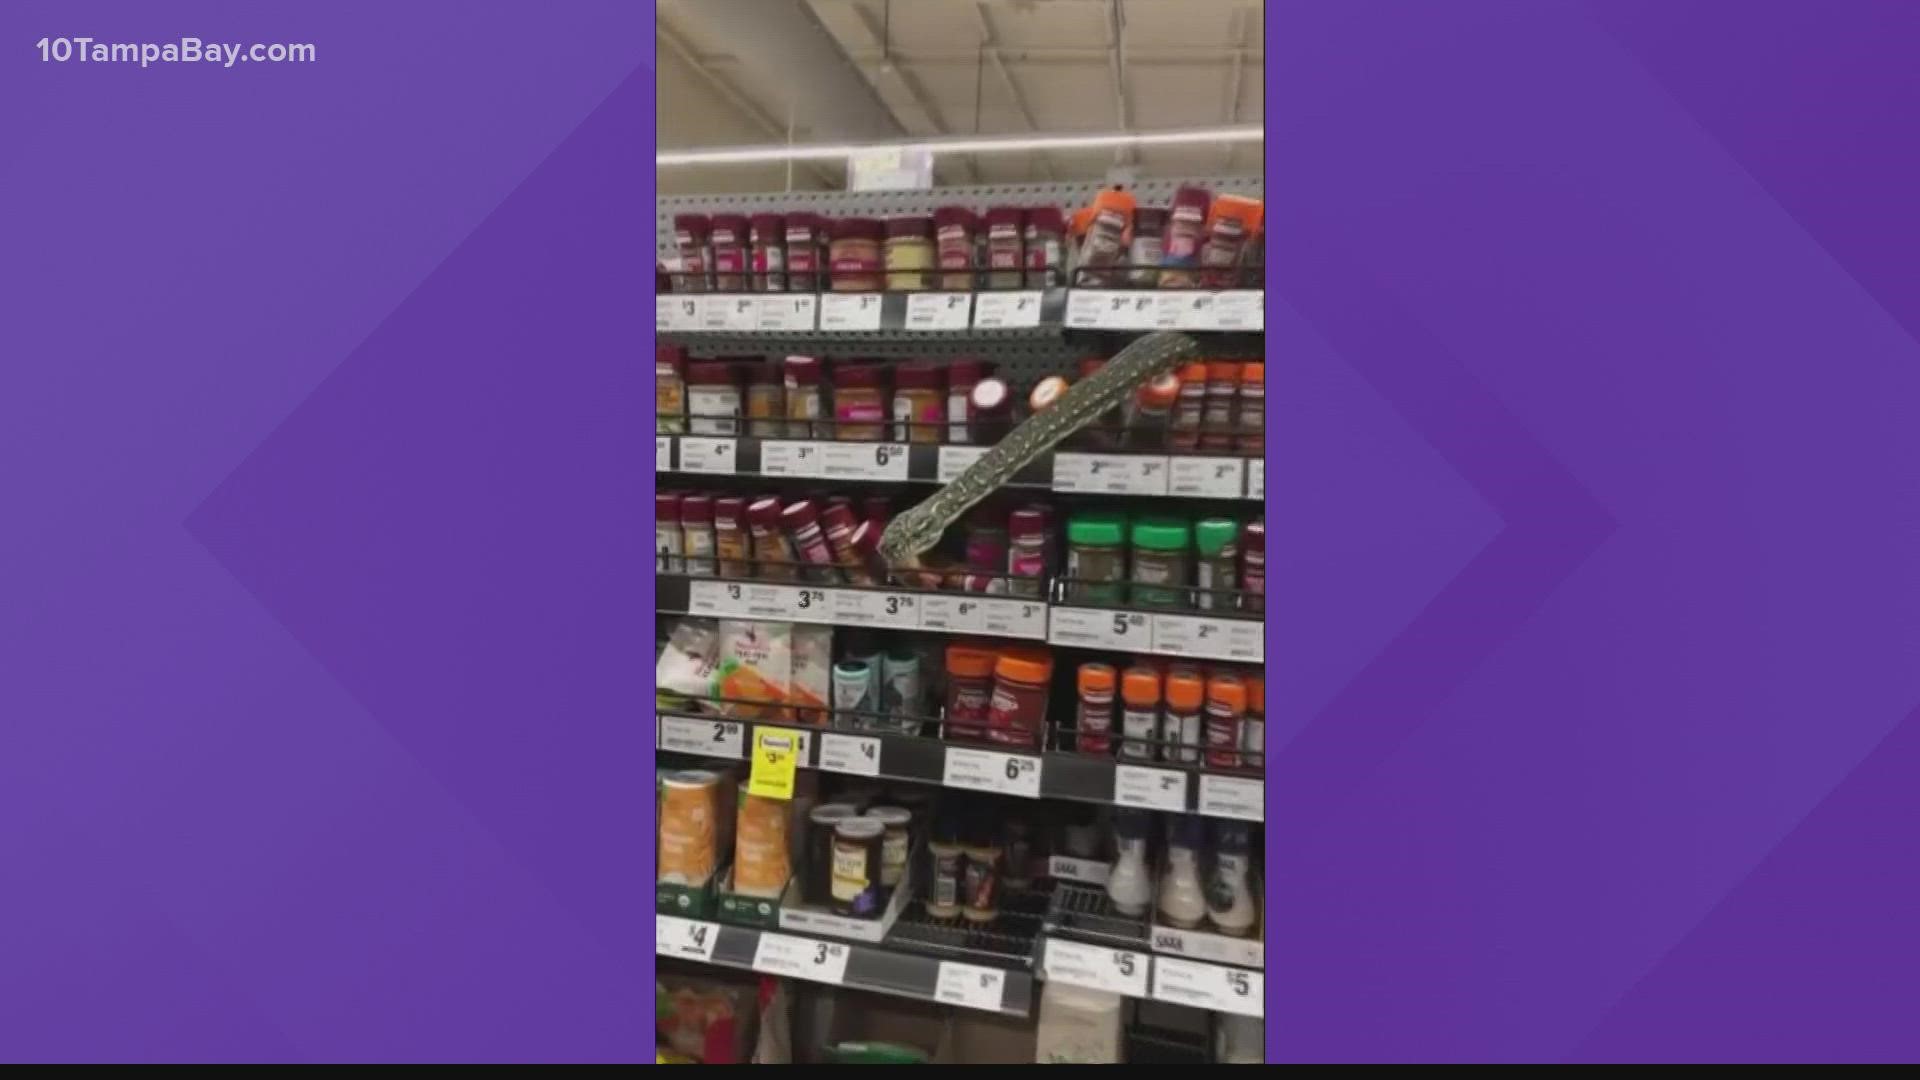 An Australia woman who also happens to be a snake handler came face-to-face with a python at a grocery store.